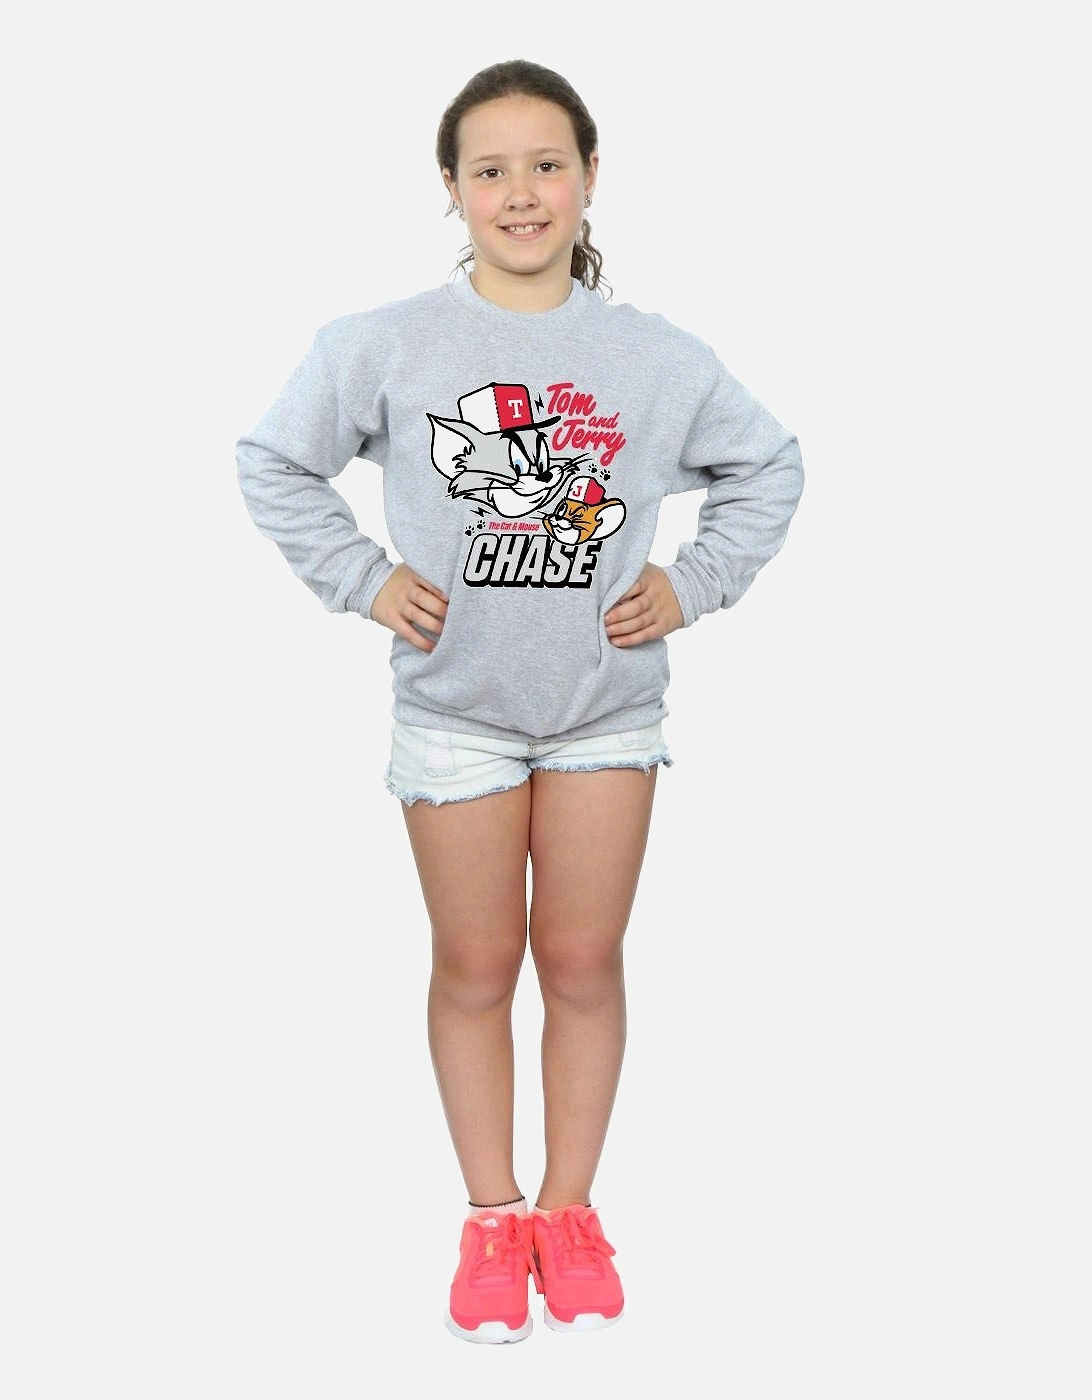 Tom And Jerry Girls Cat & Mouse Chase Sweatshirt